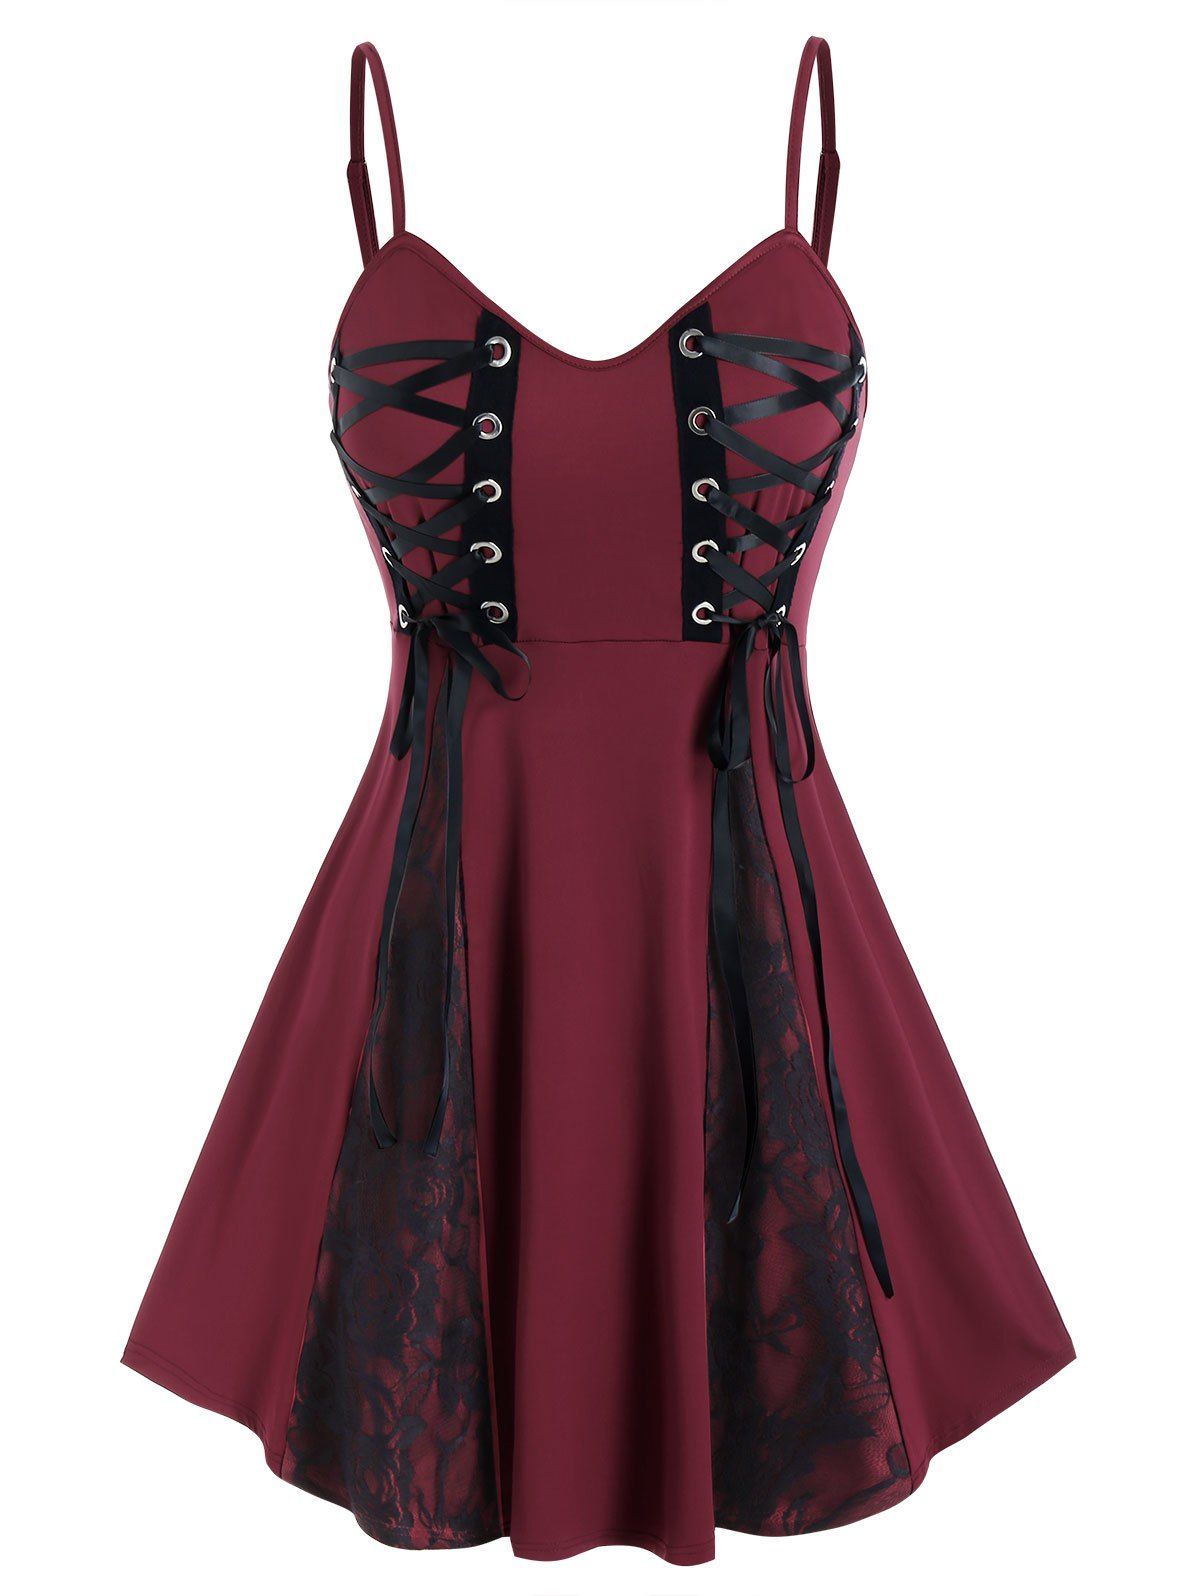 [29% OFF] 2021 Plus Size Lace Up Gothic Dress In RED WINE | DressLily